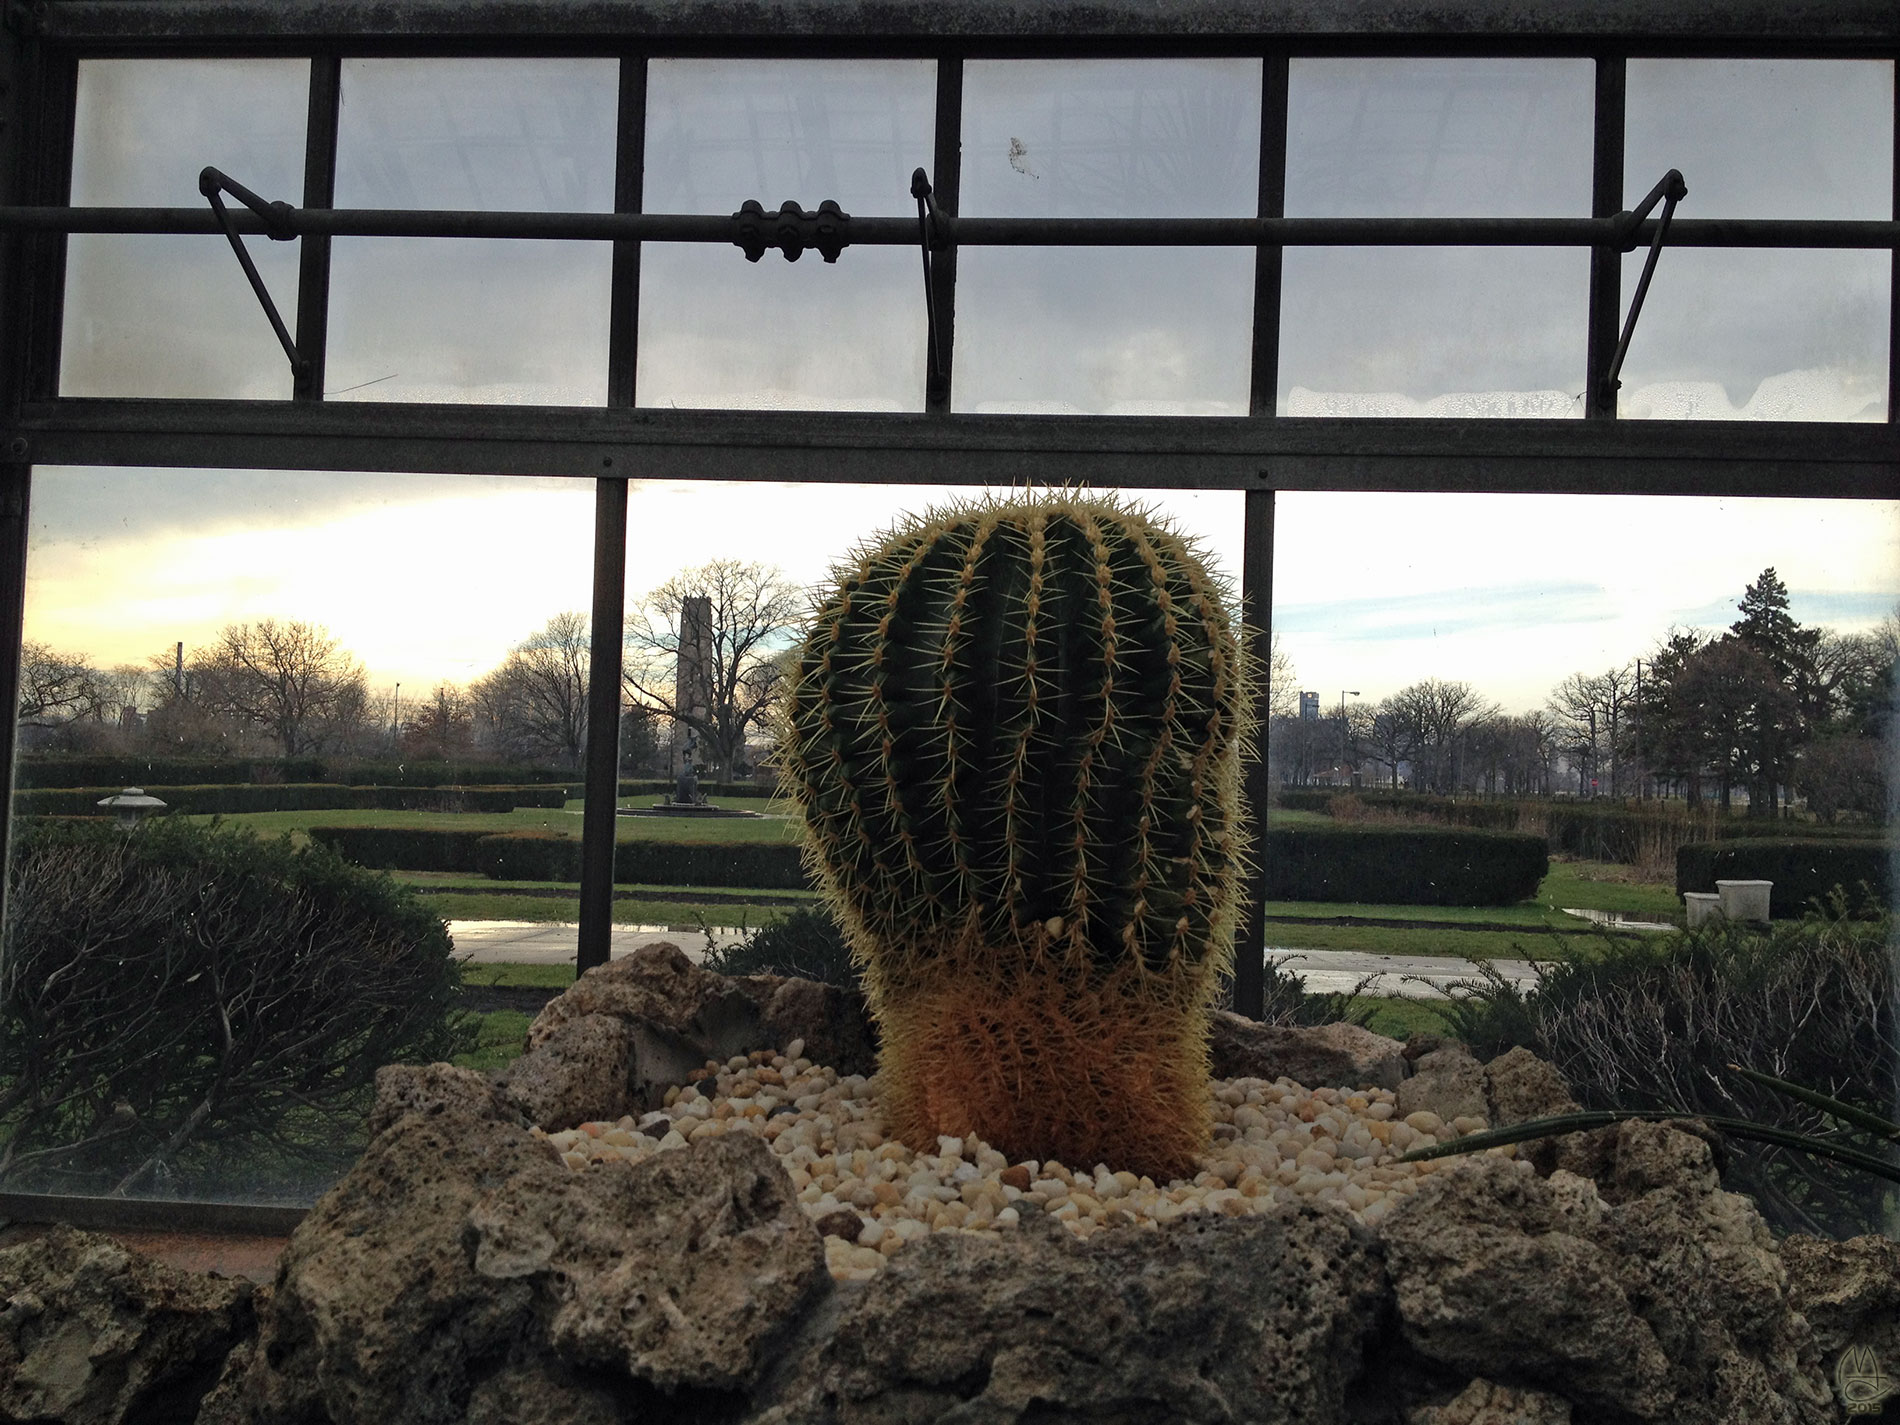 Cactus, Anna Scripps Whitcomb Conservatory, Belle Isle